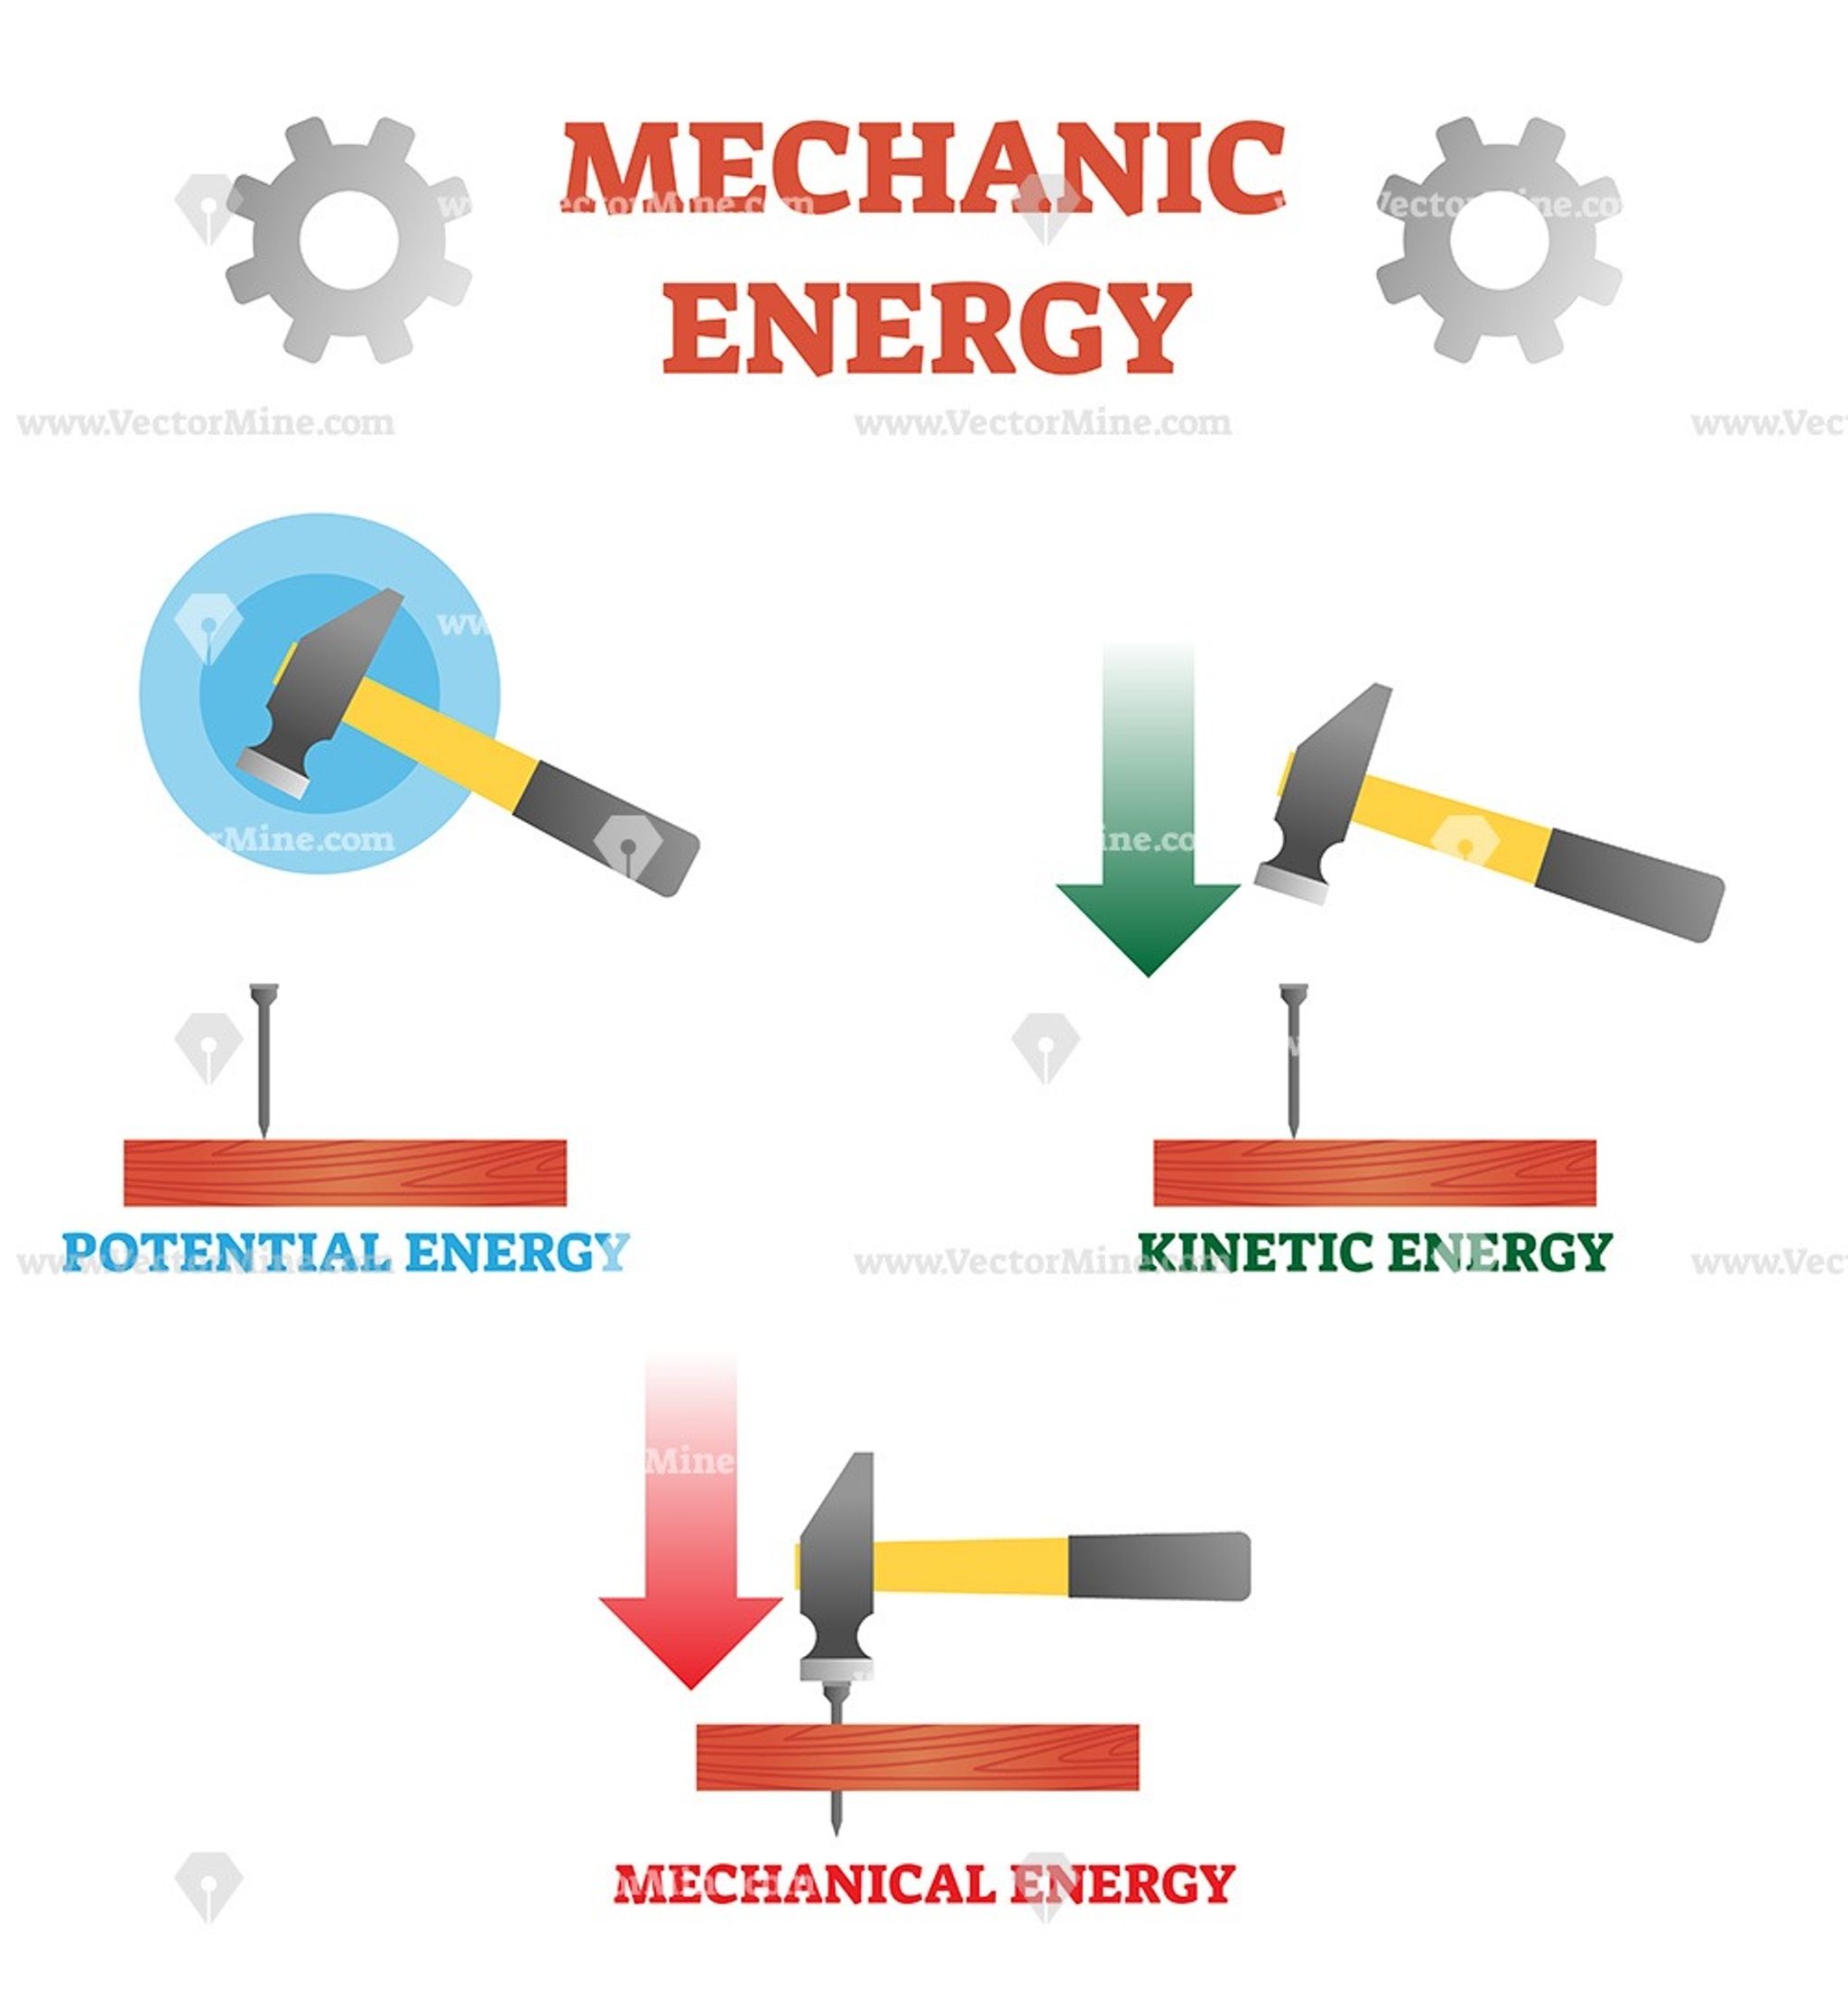 Physics Images Of Energy